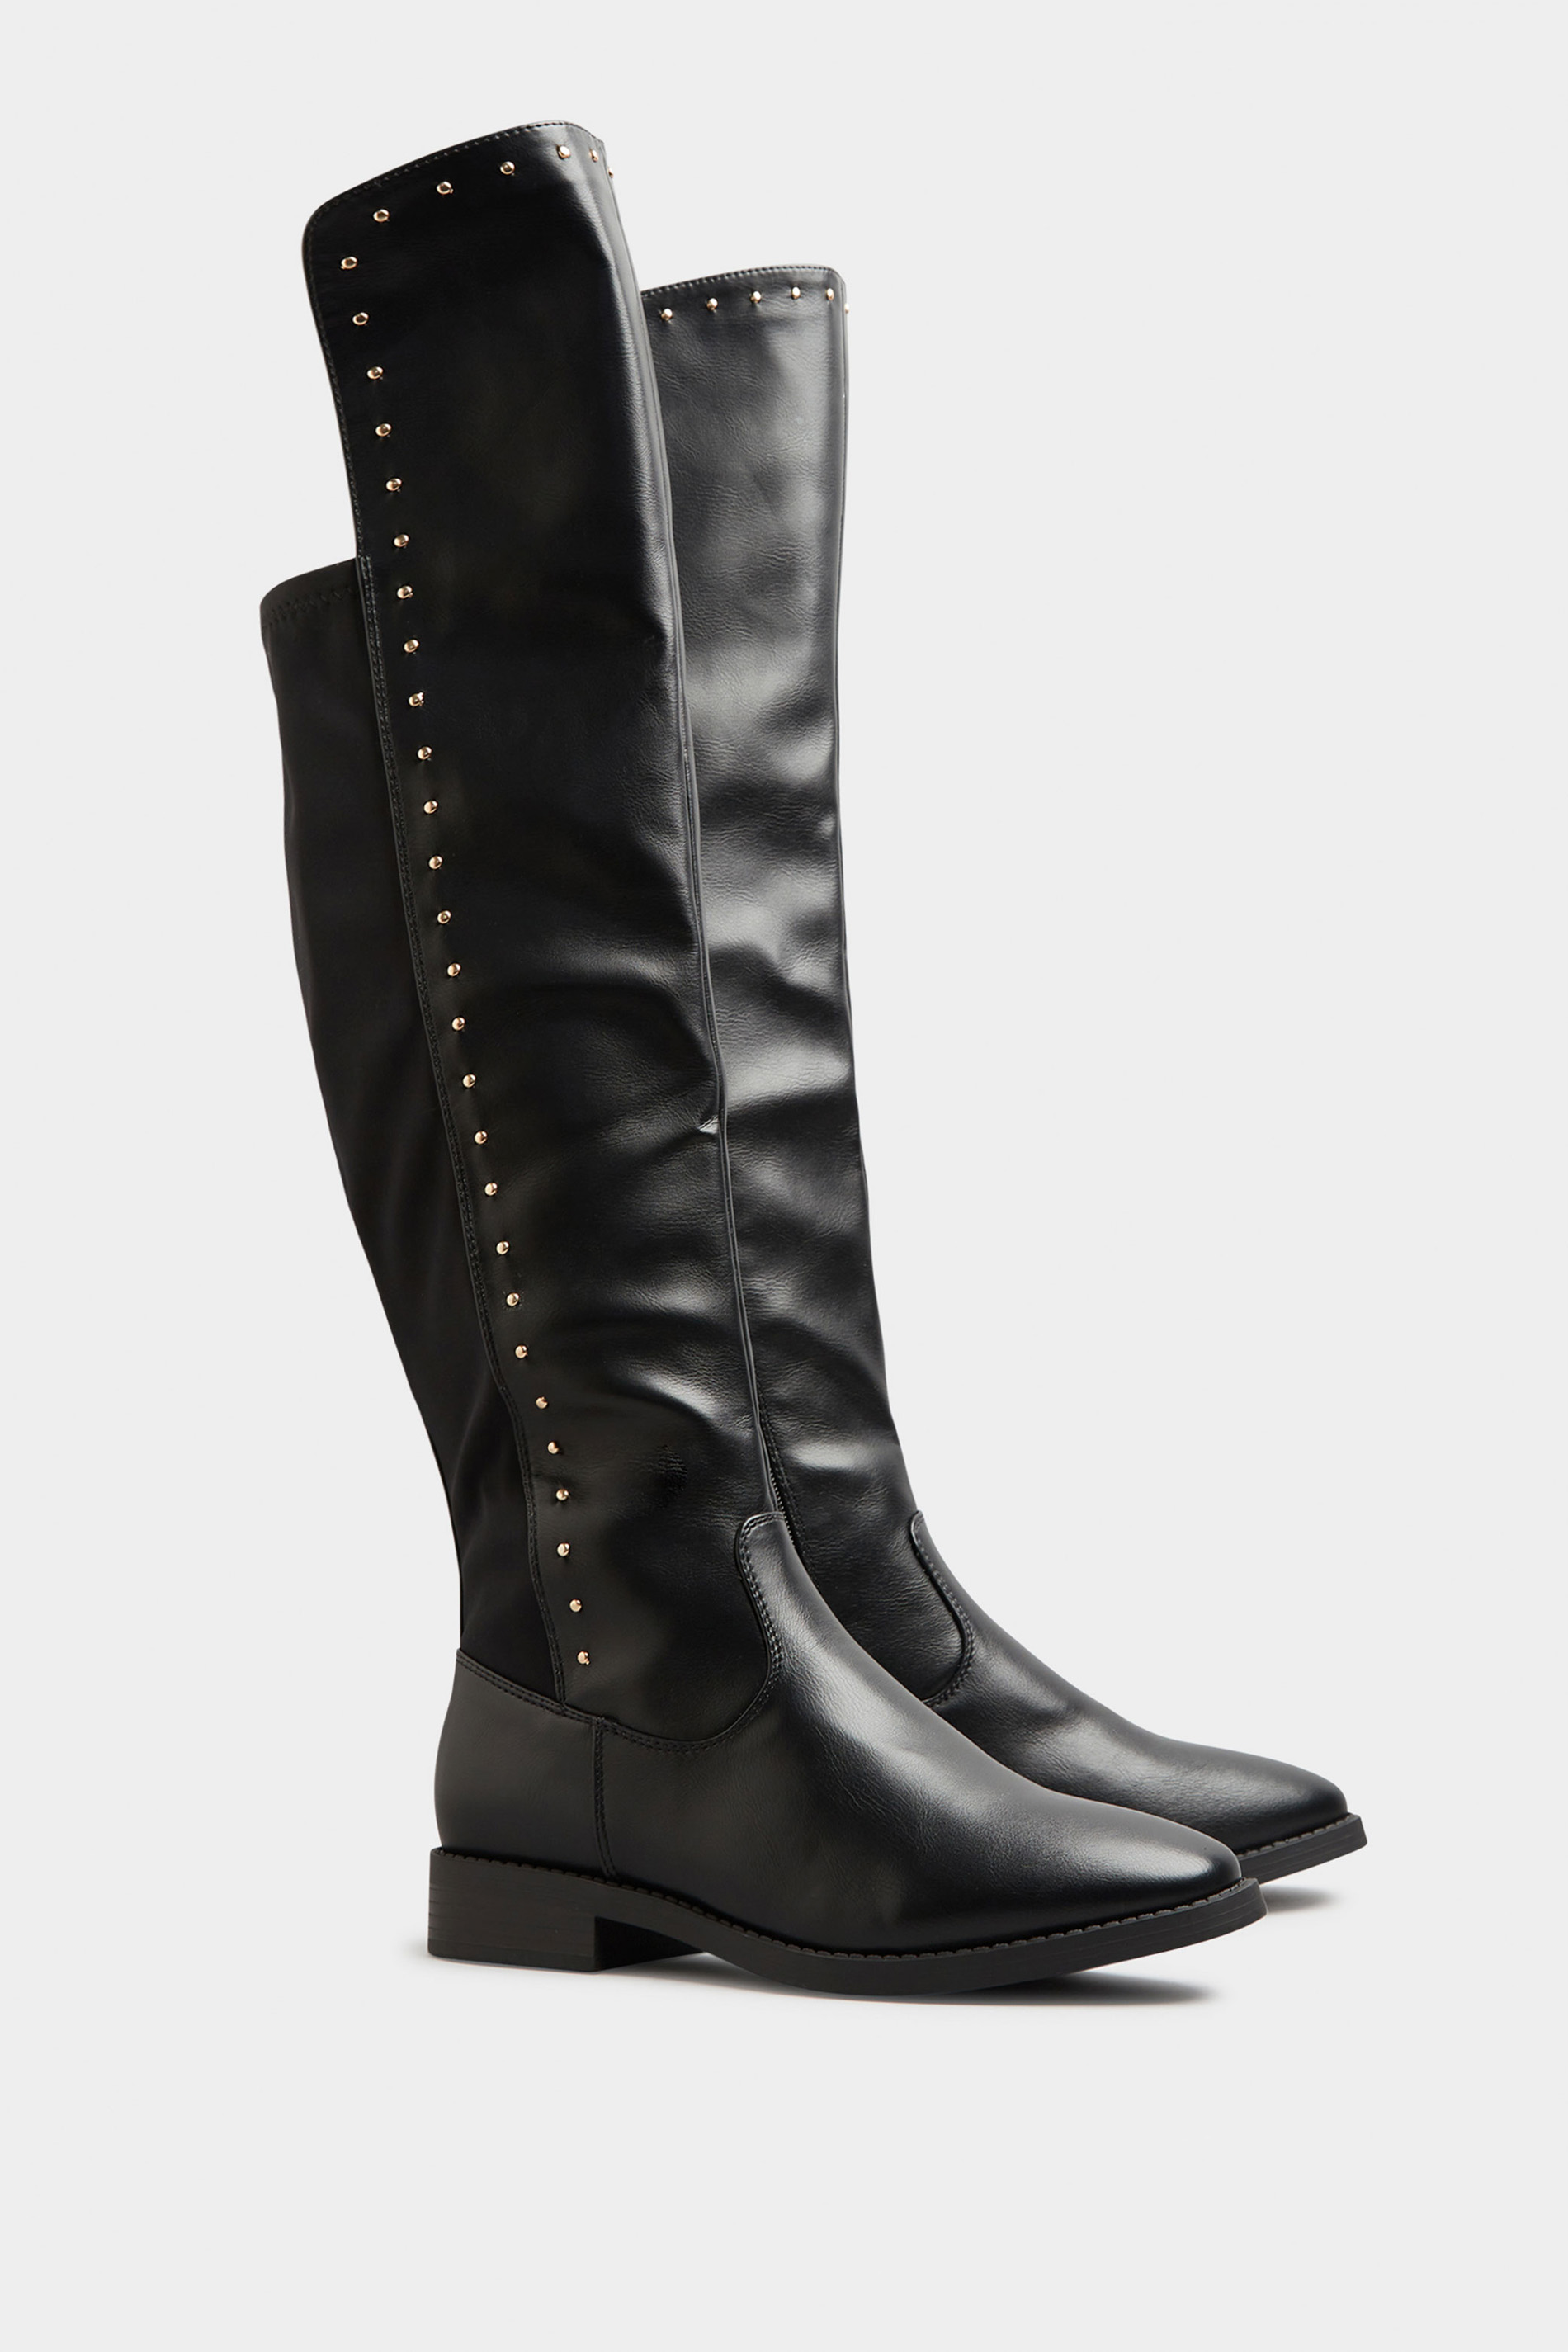 LIMITED COLLECTION Black PU Stud Over The Knee Boots In Extra Wide Fit | Yours Clothing 2